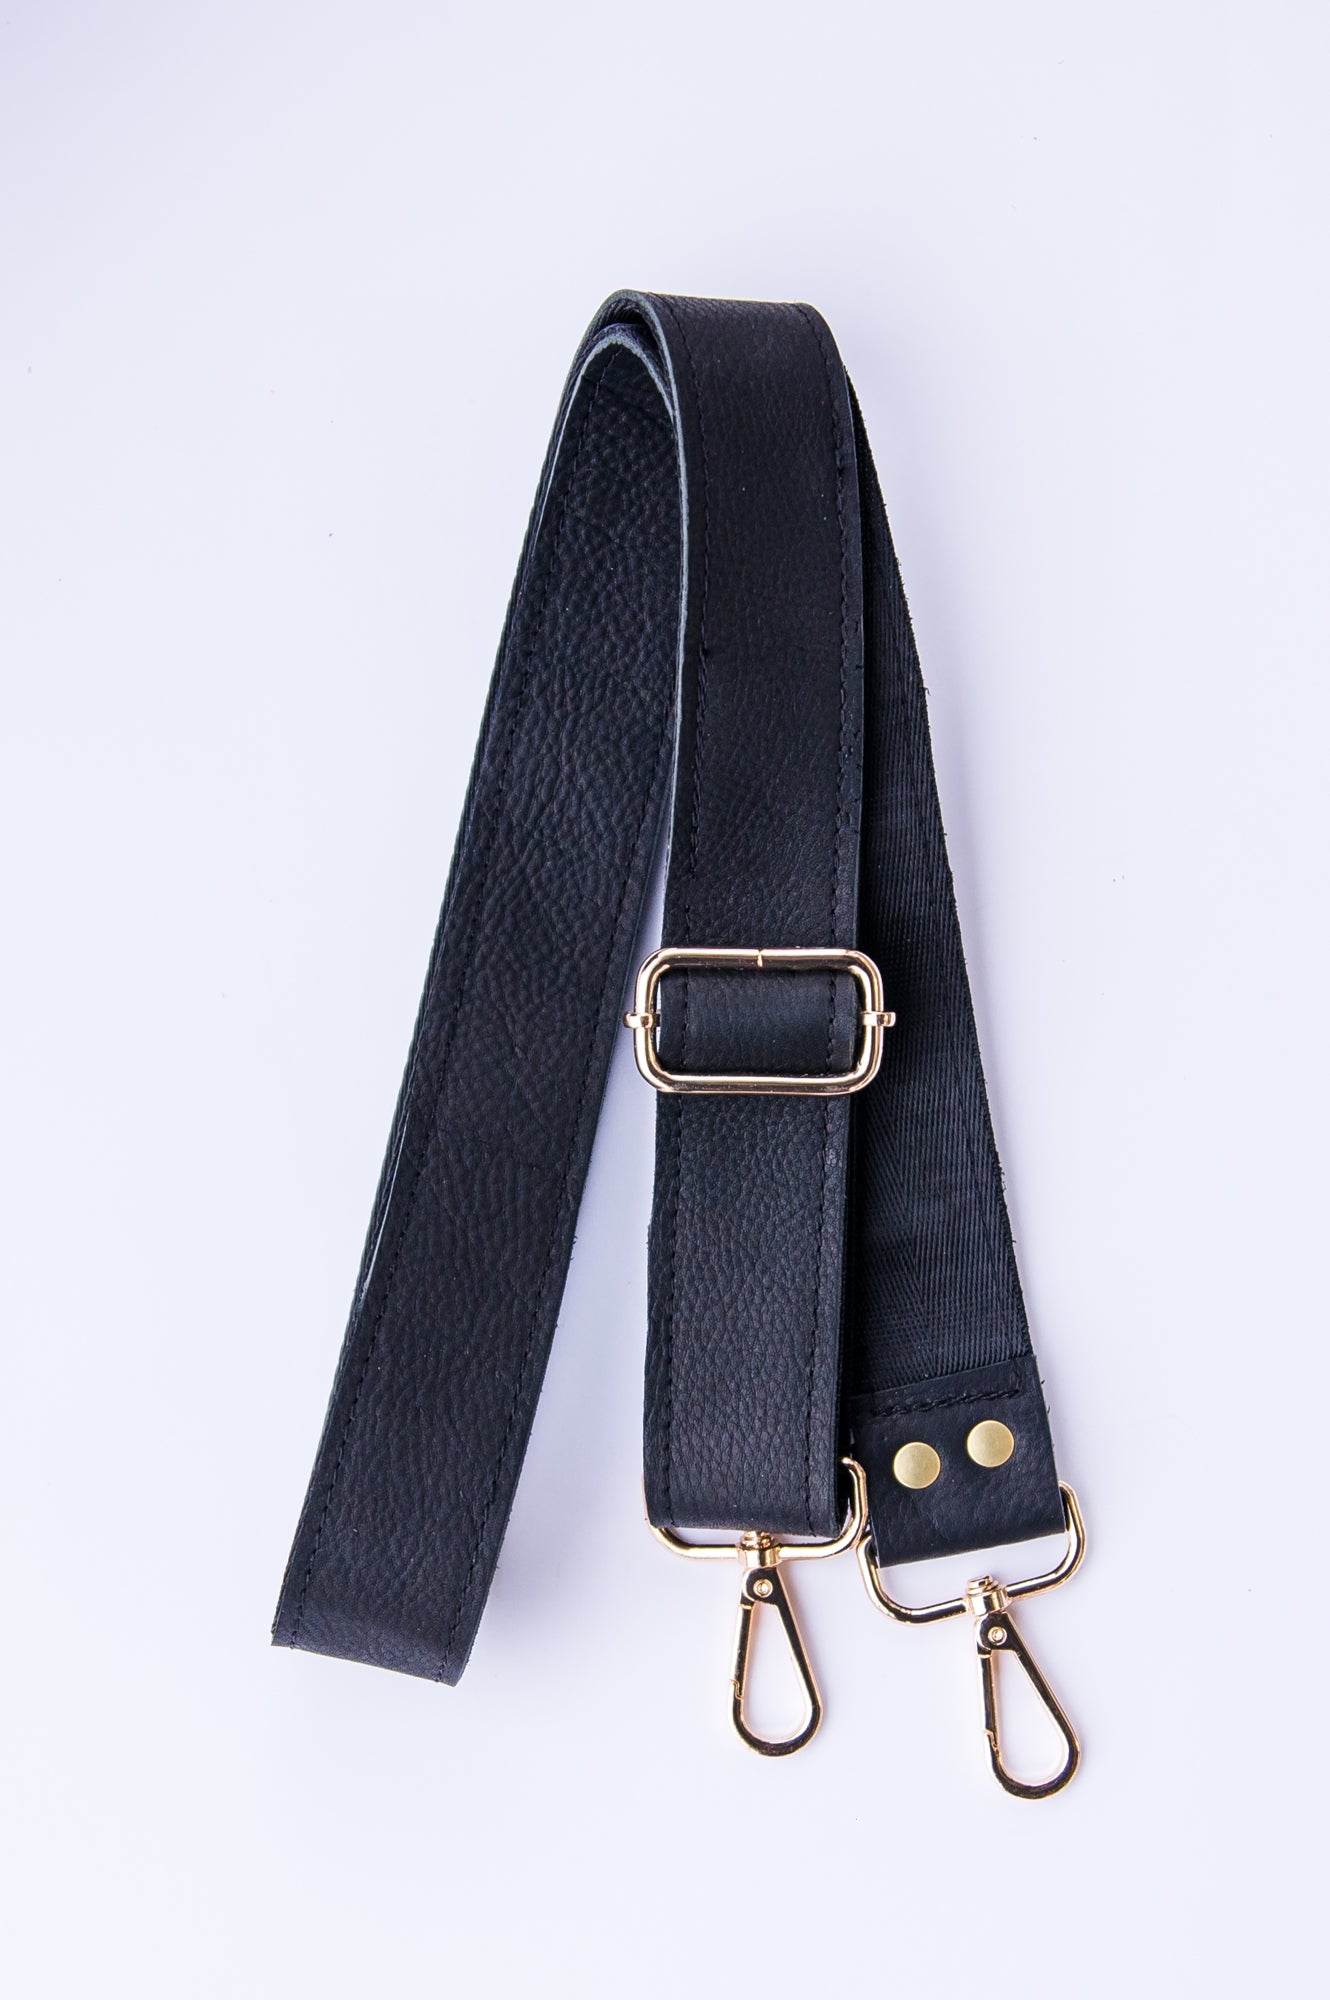 Crossbody Adjustable Buckle Strap 1 Inch Wide, 16XLG U-shape Hooks Choice  of Leather Color and Hardware Finish -  Canada